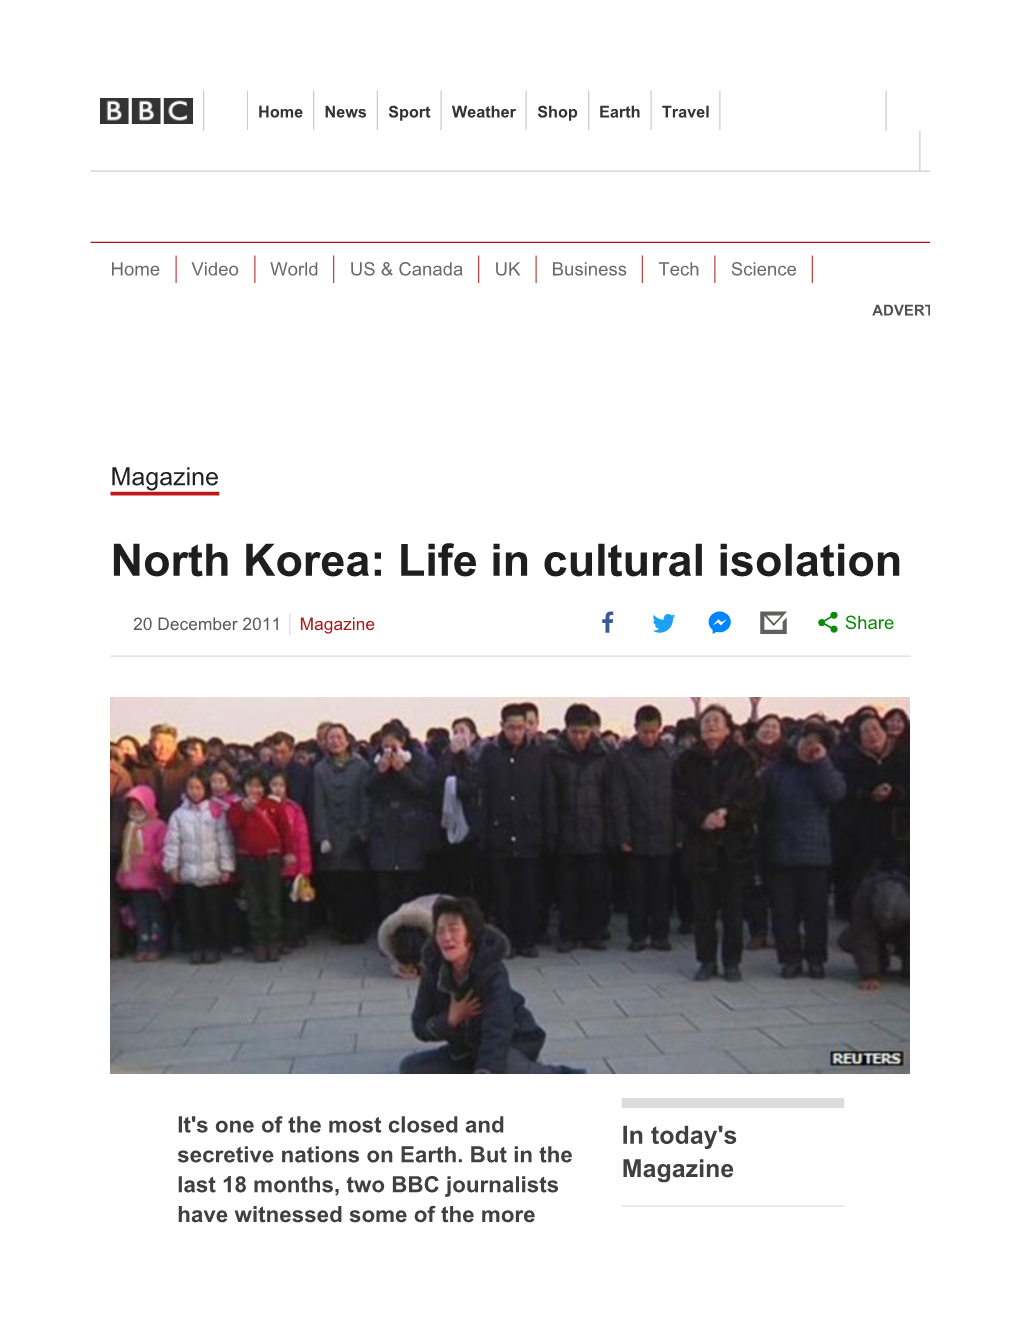 North Korea: Life in Cultural Isolation